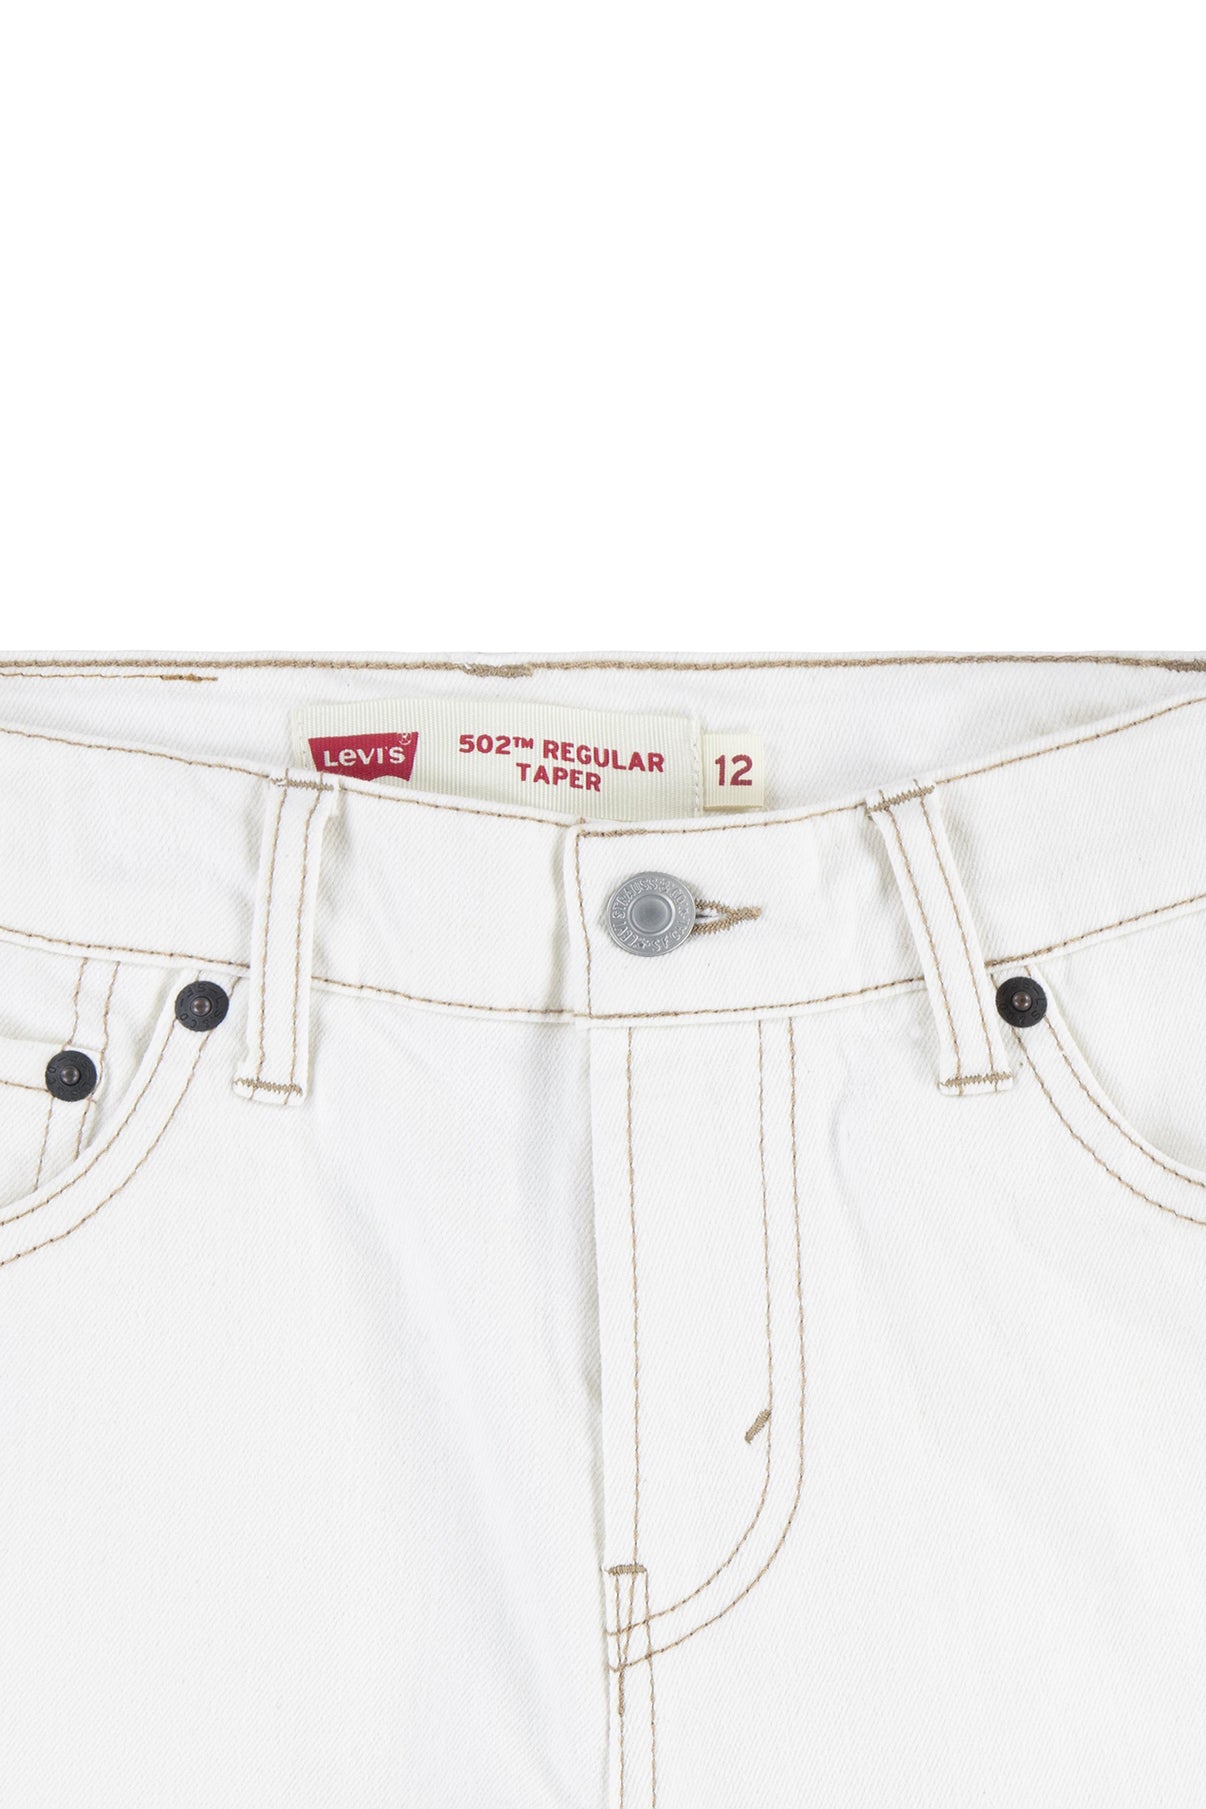 LEVIS BOY Jeans Taper Colored